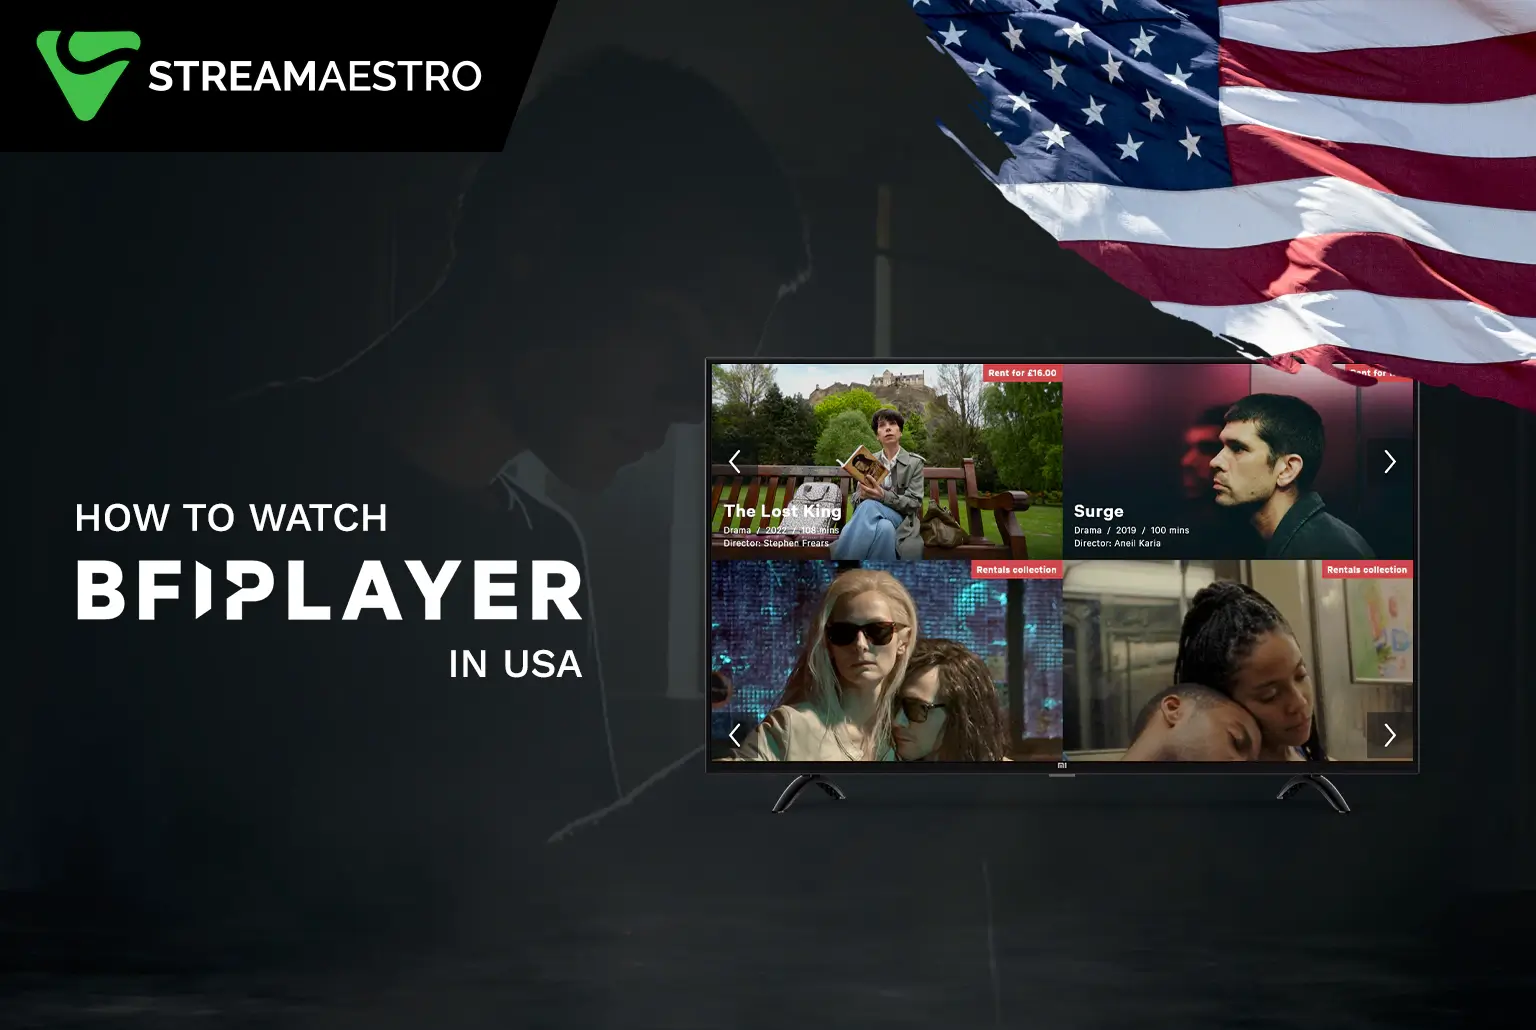 BFI Player in USA